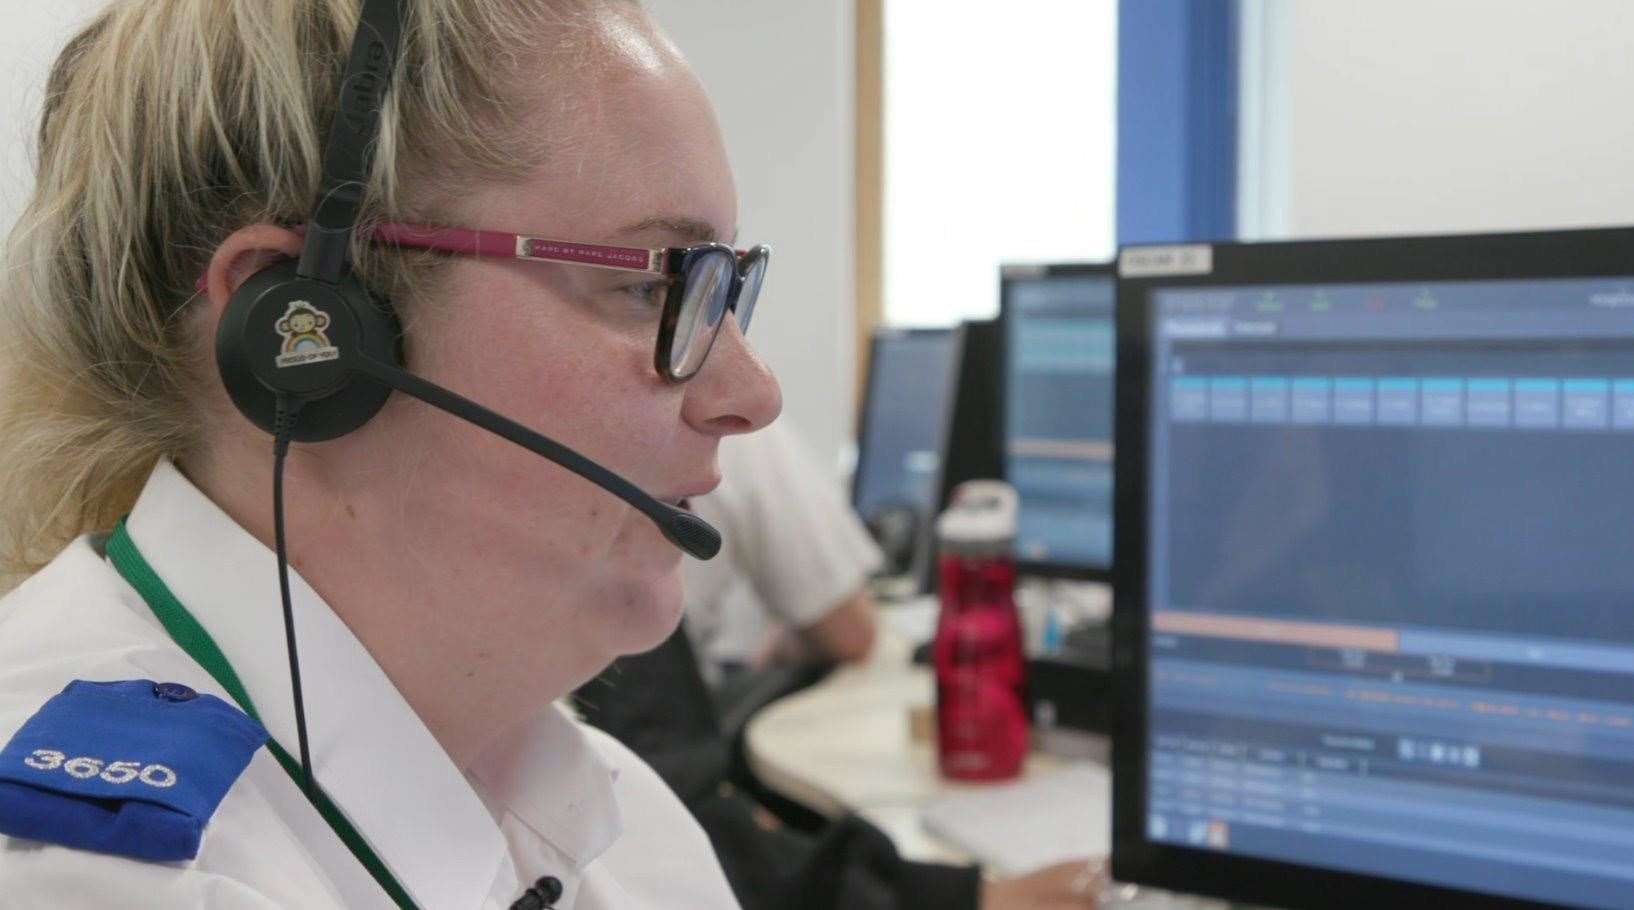 Calls to the police's 101 number have decreased by 3%